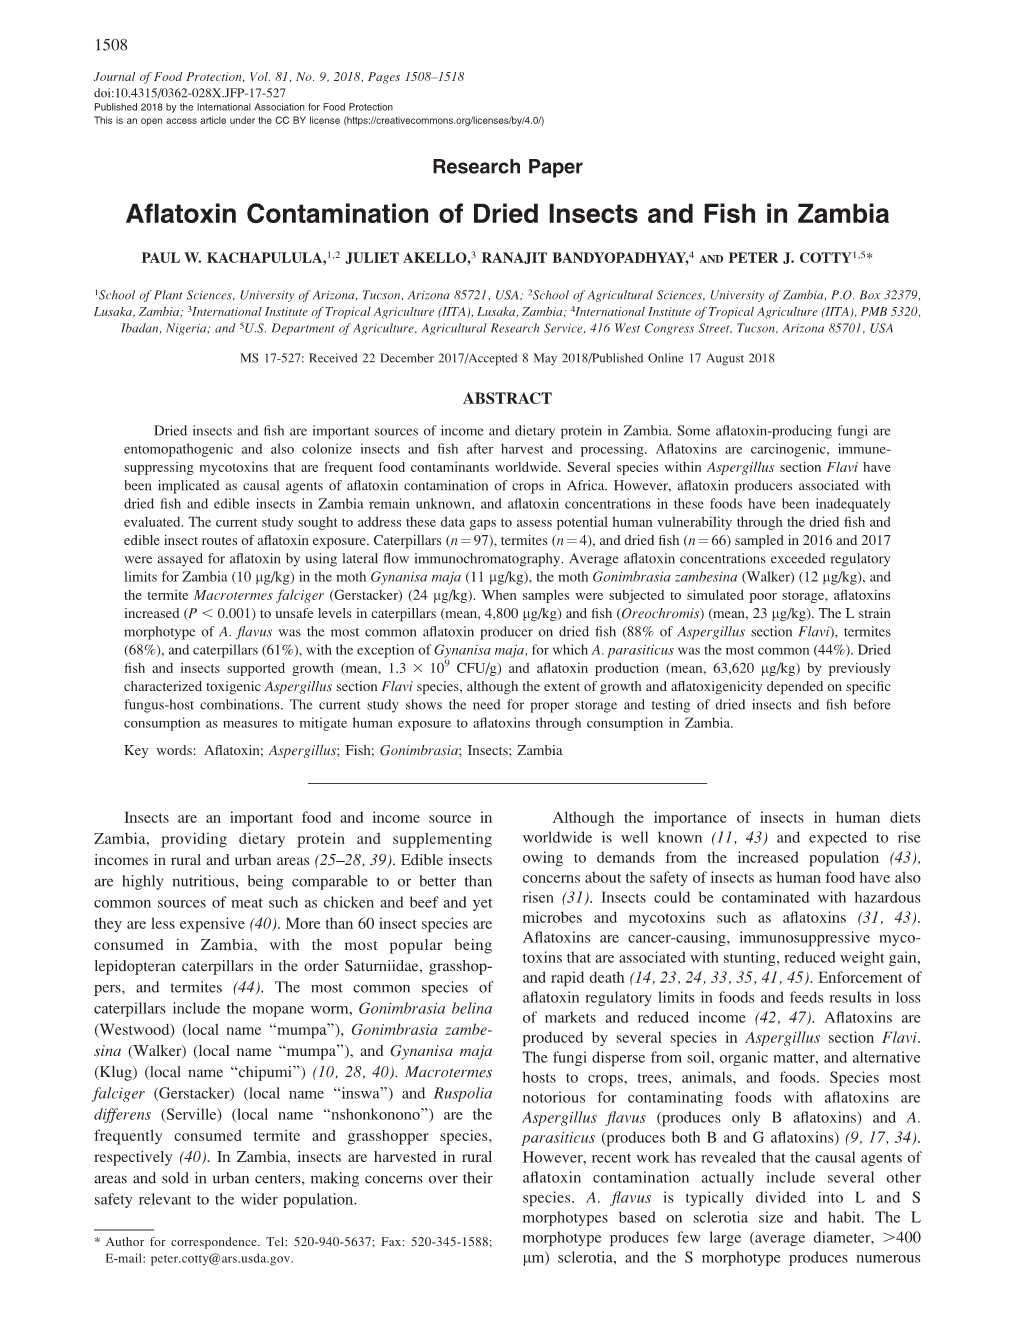 Aflatoxin Contamination of Dried Insects and Fish in Zambia